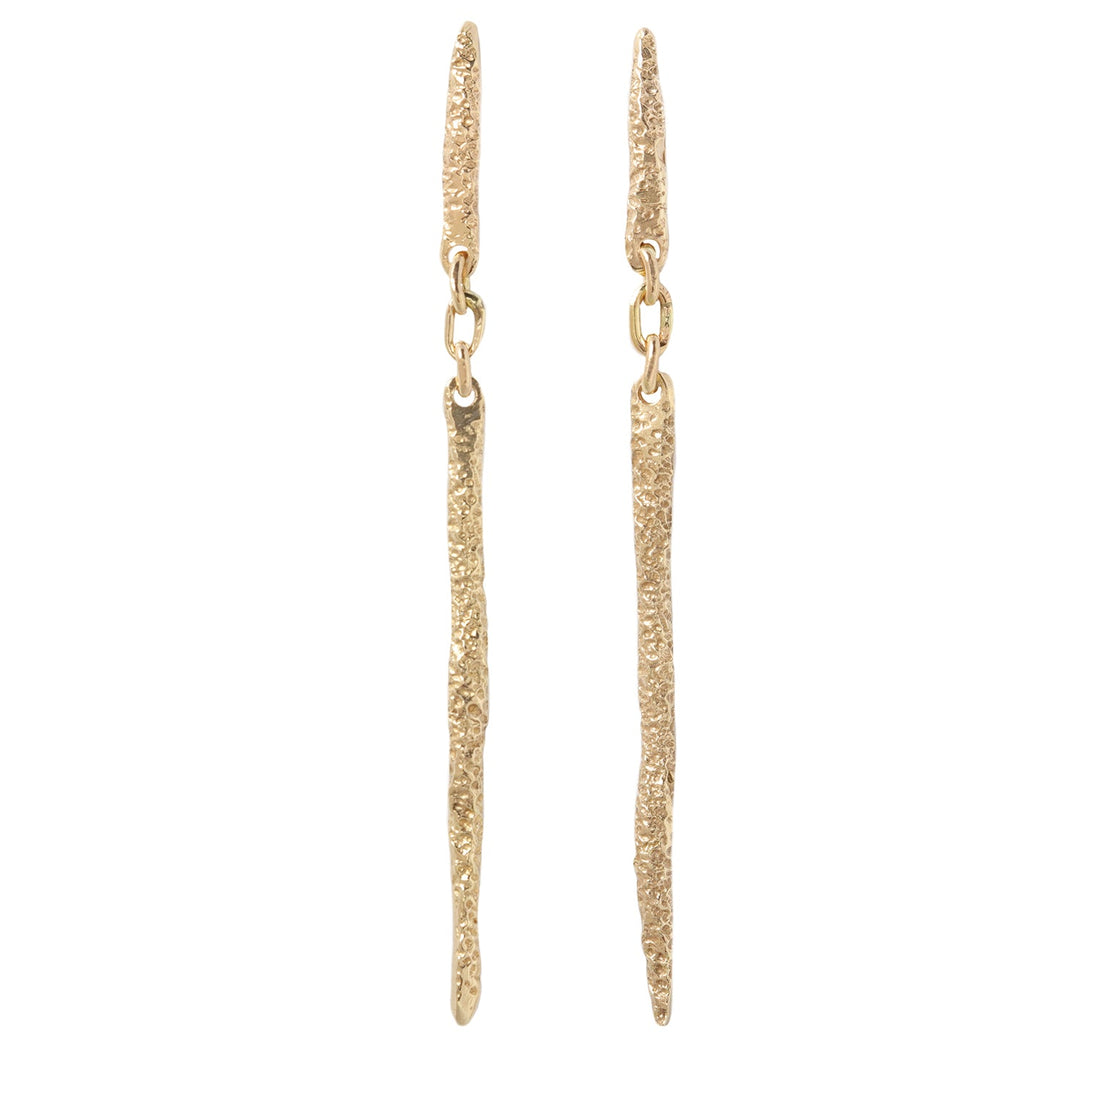 Long Sand Spine Drops in 14k gold by Erin Cuff Jewelry.